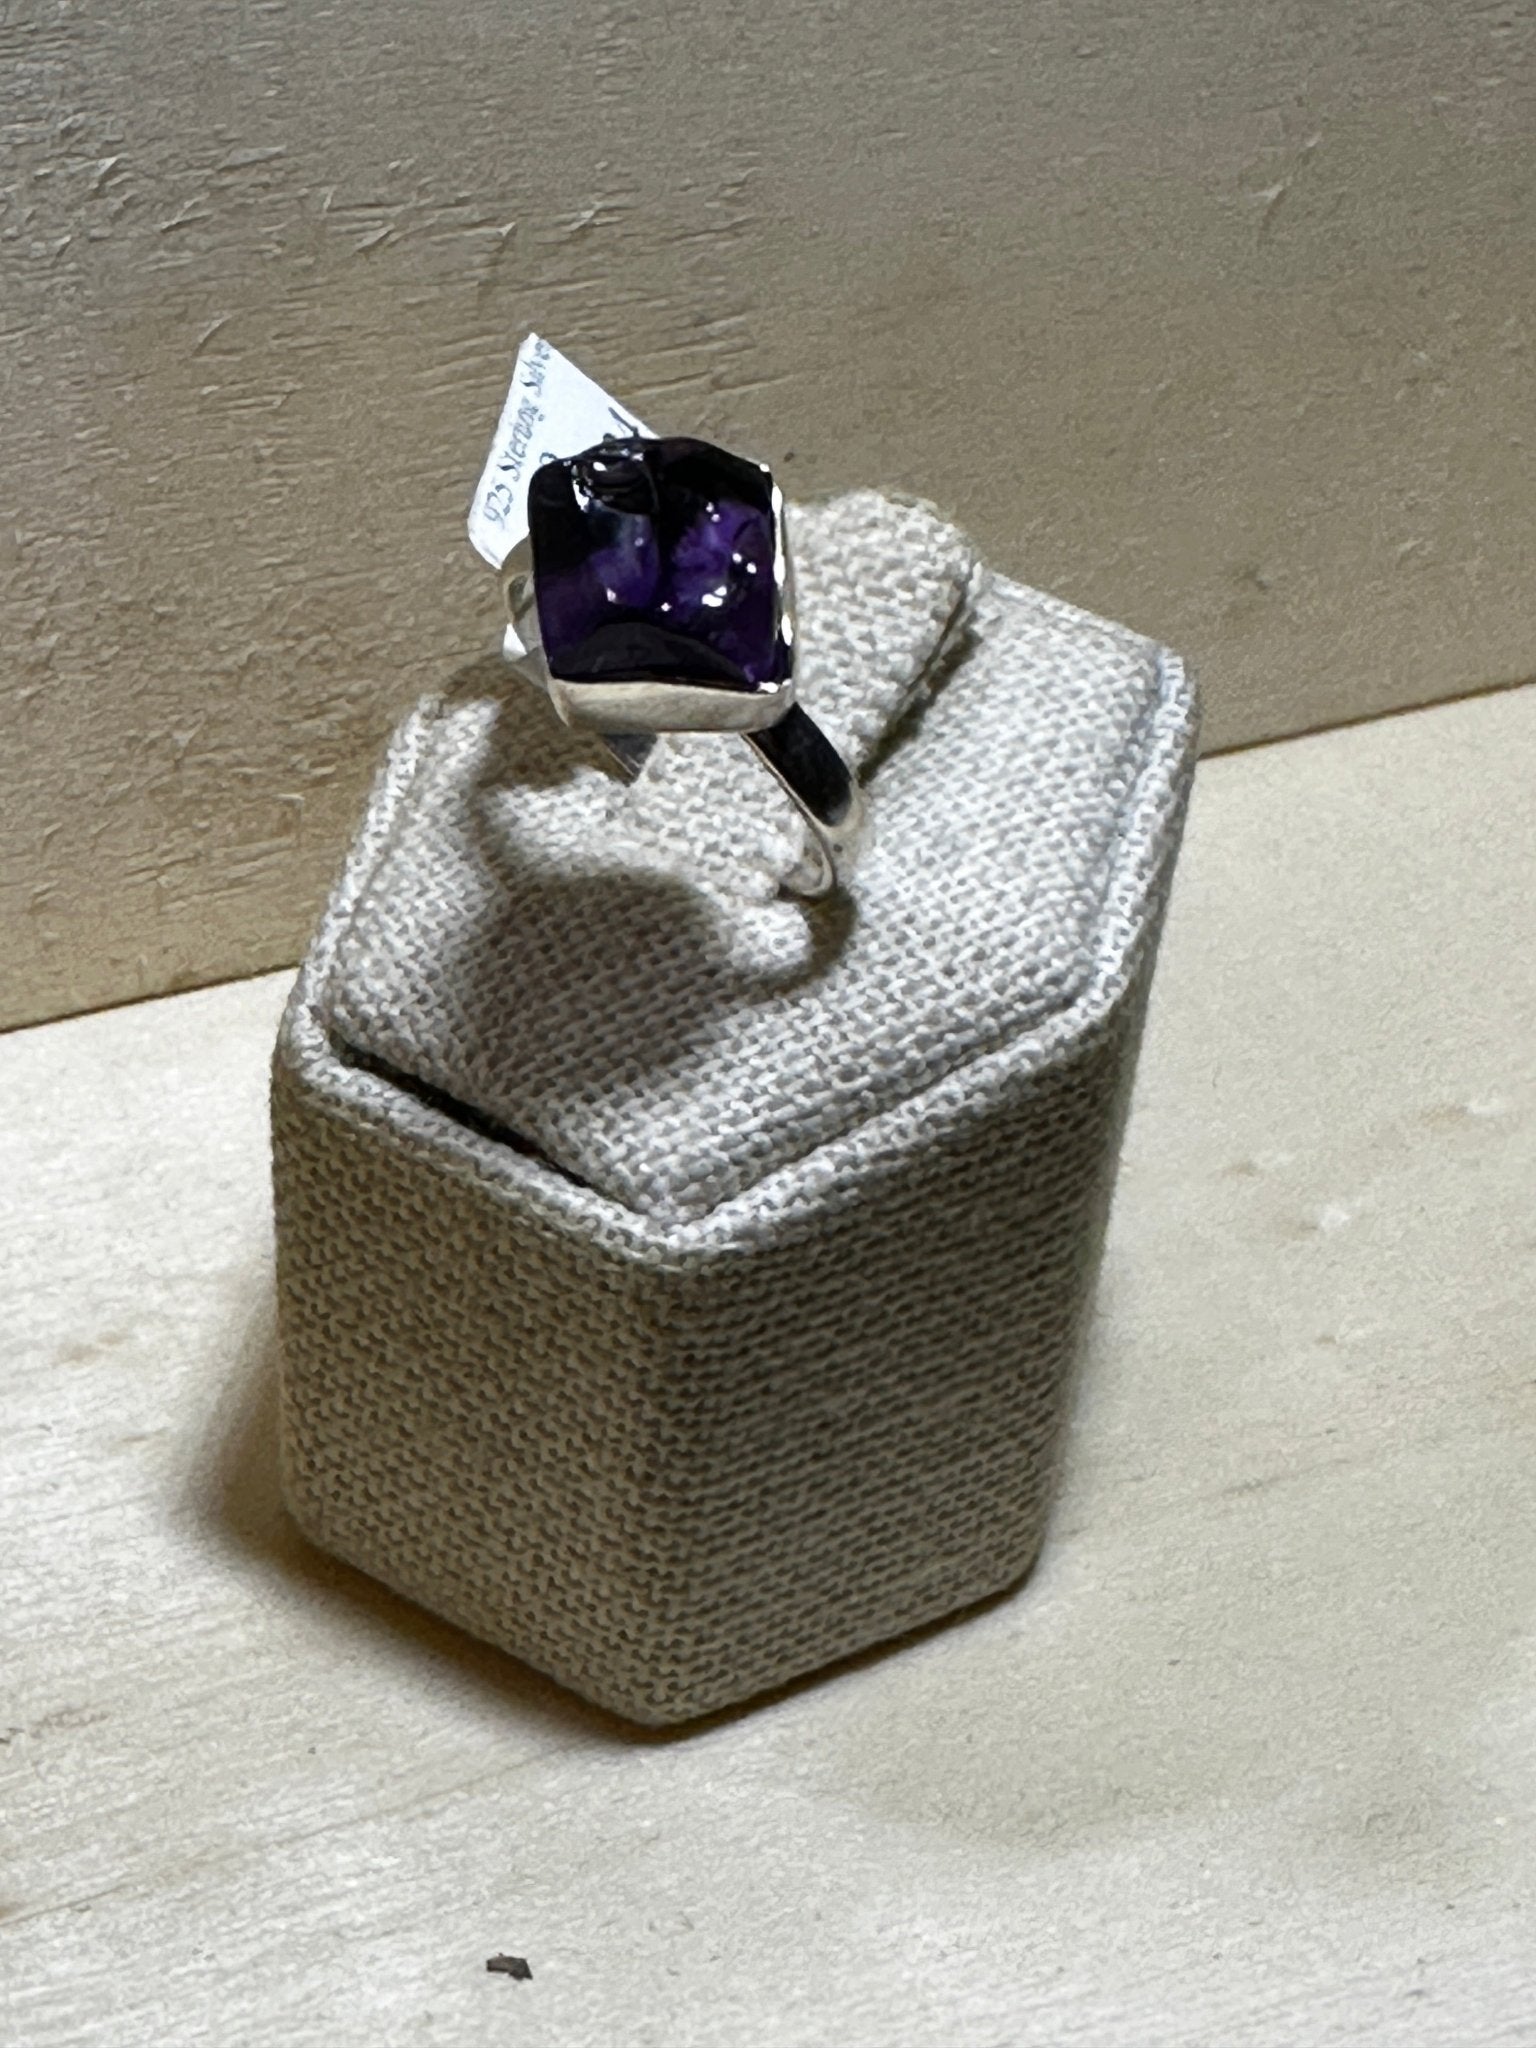 Rough Amethyst Ring Size 9 (03.7024) - Sacred Crystals Rings